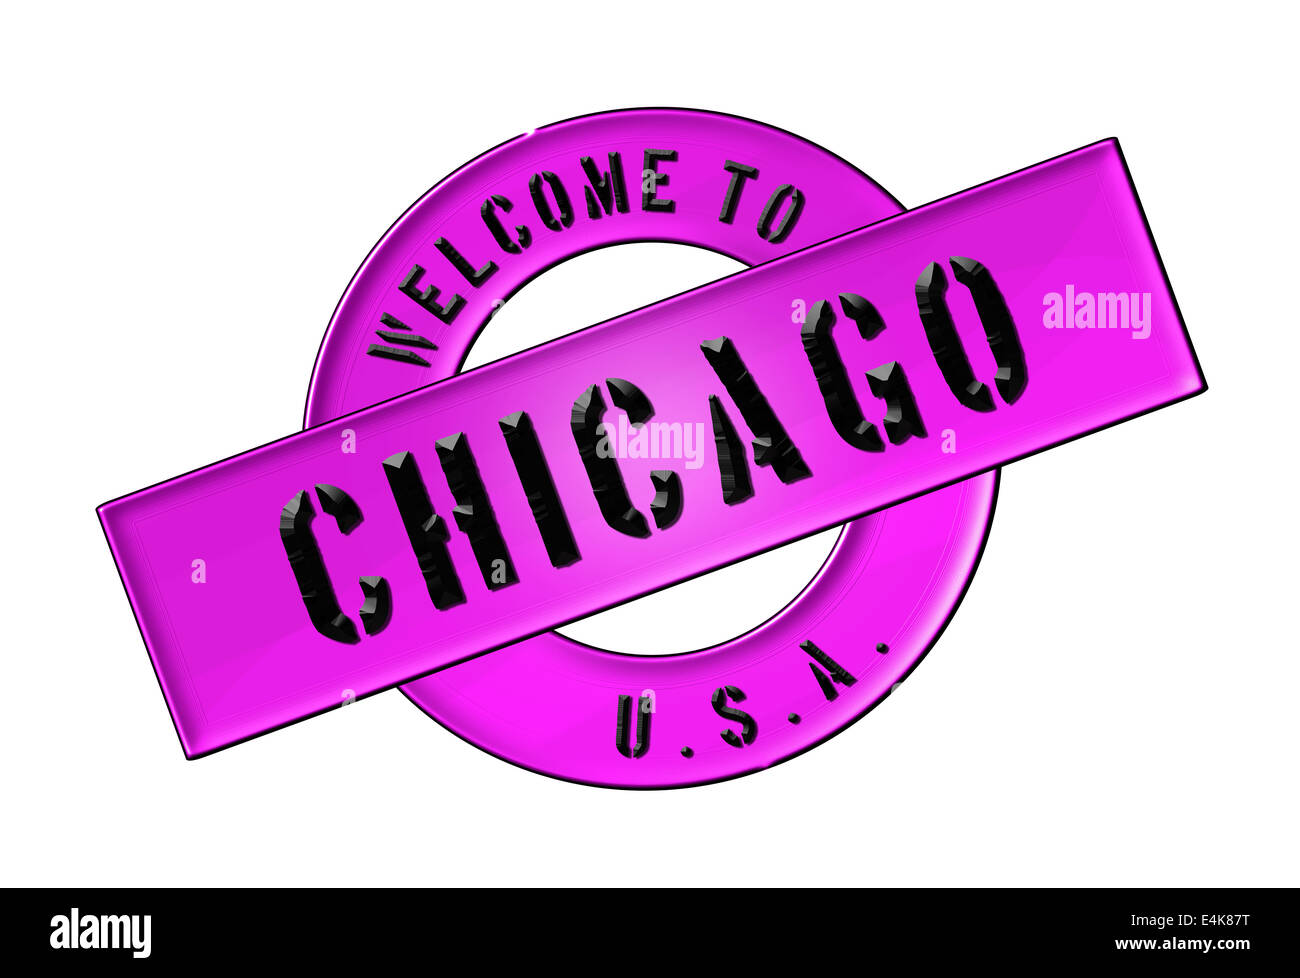 WELCOME TO CHICAGO Stock Photo